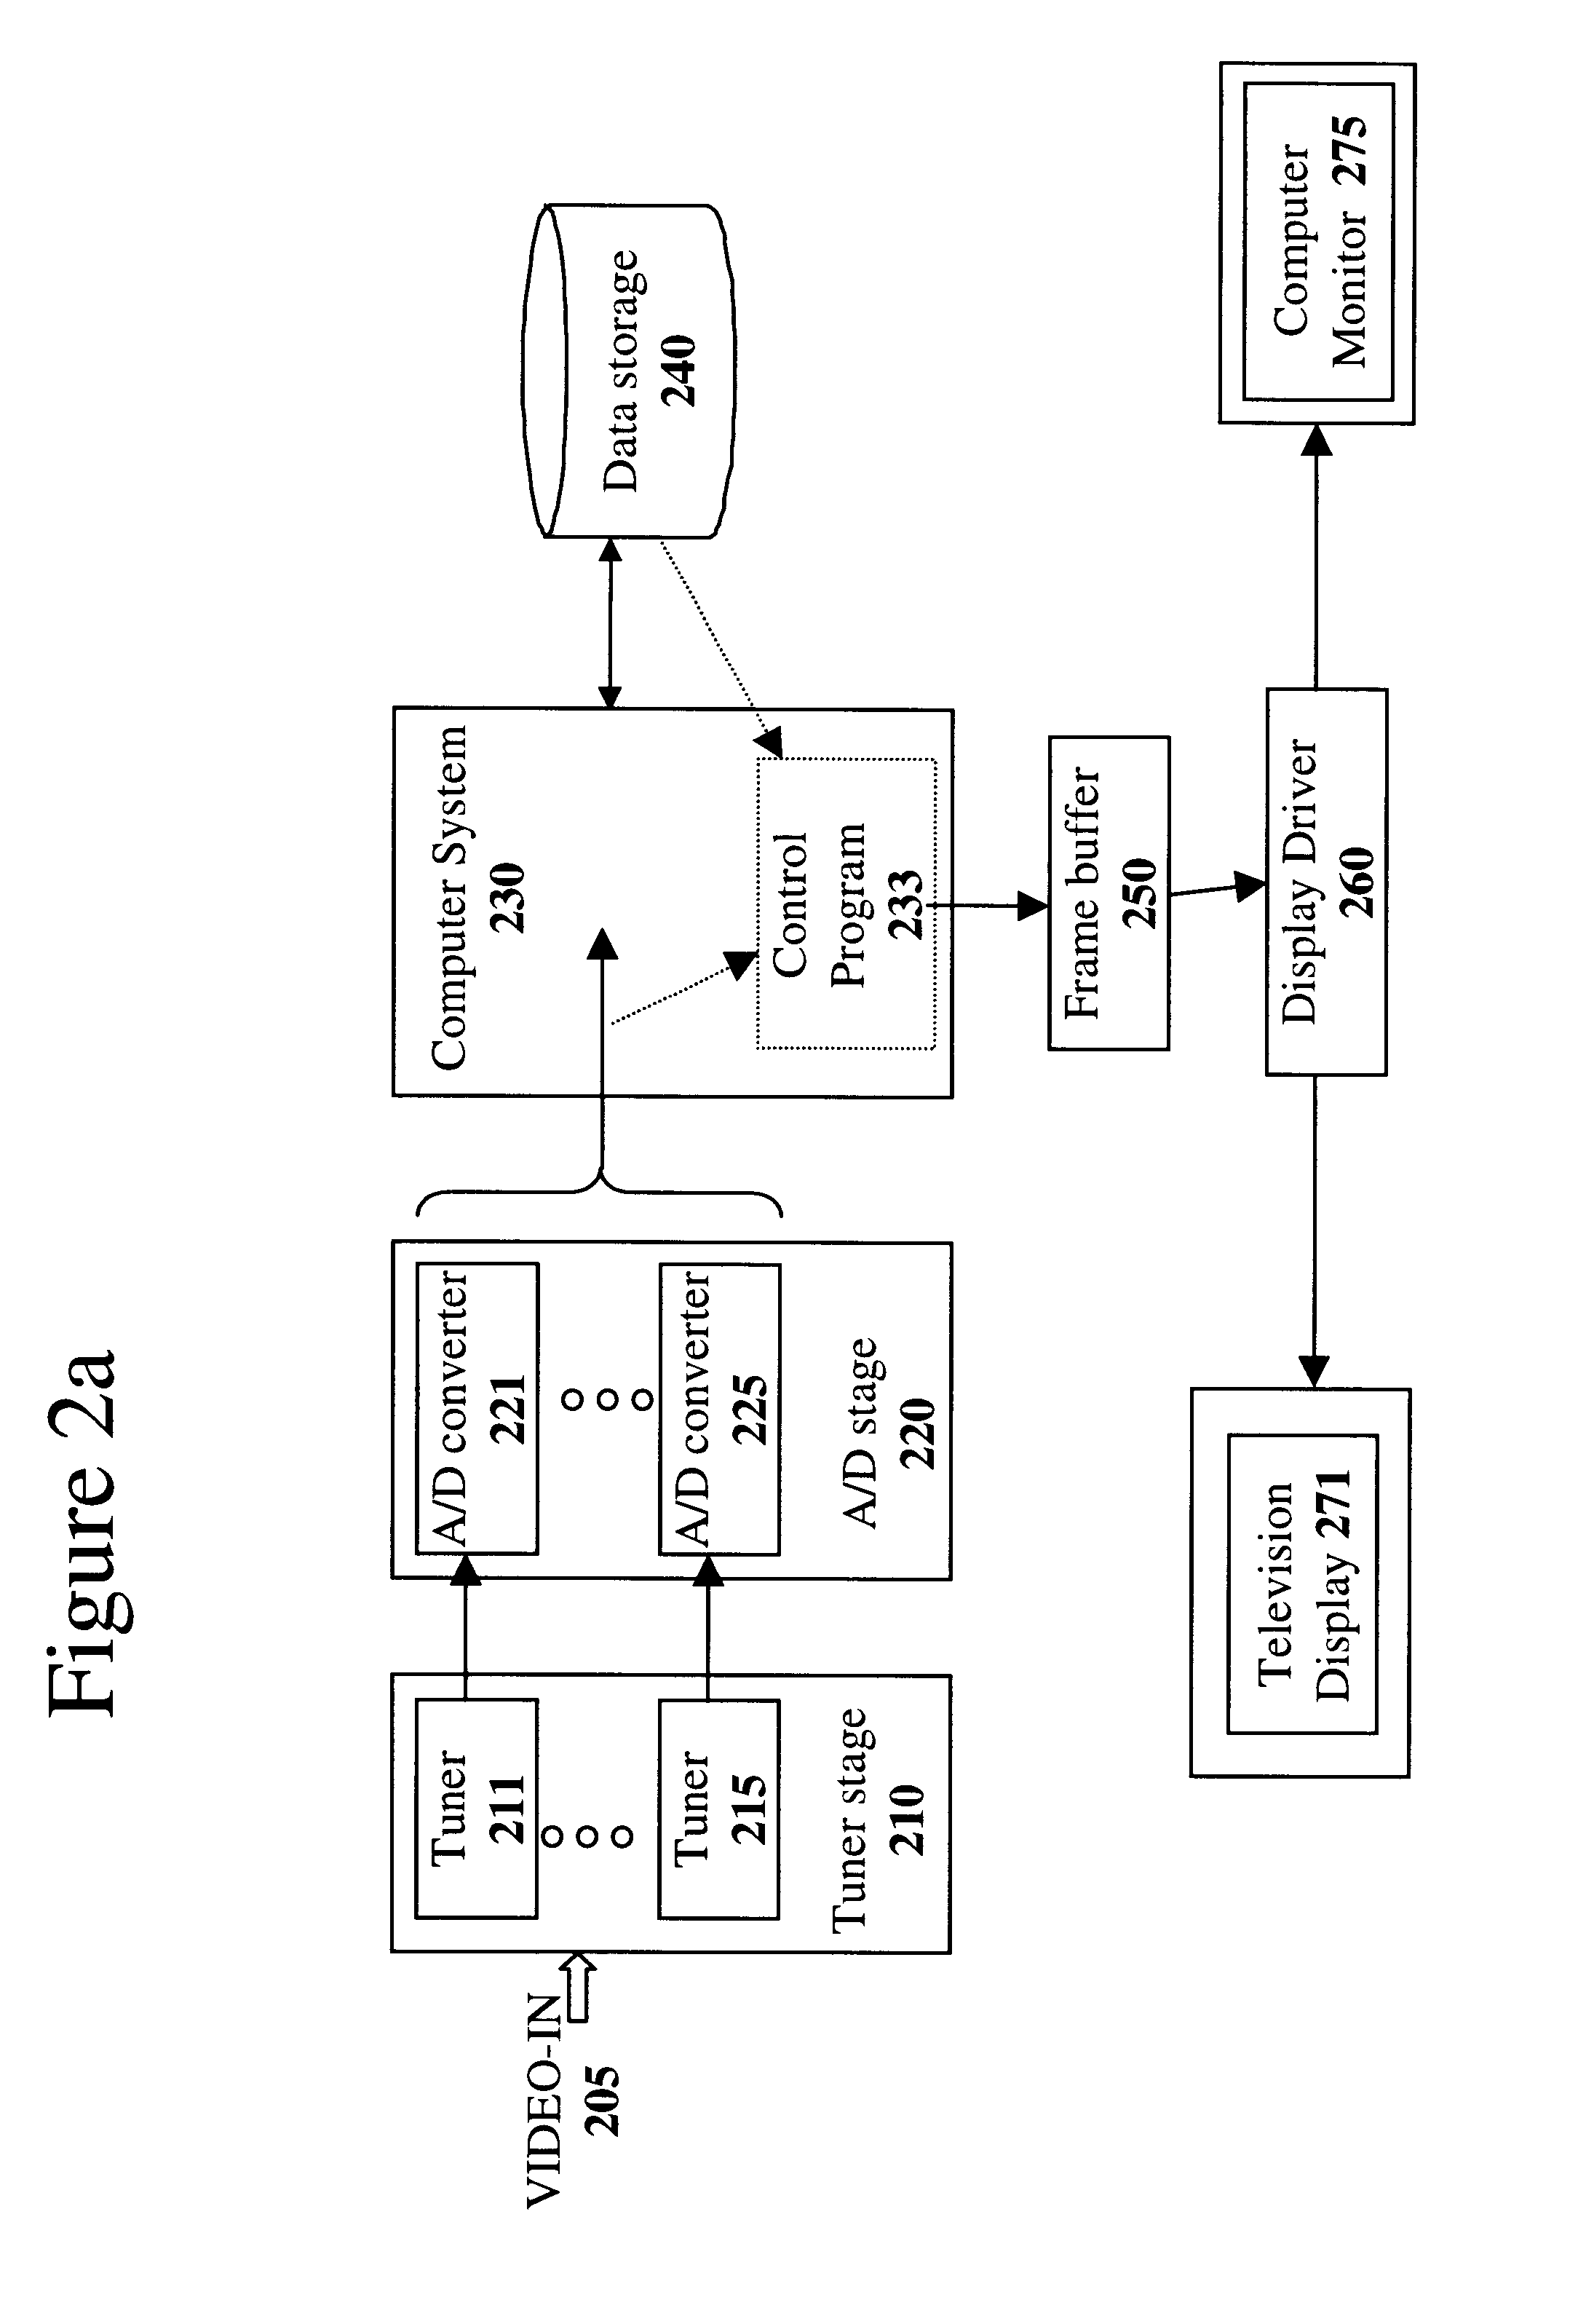 Method and apparatus for dynamically generating a visual program summary from a multi-source video feed